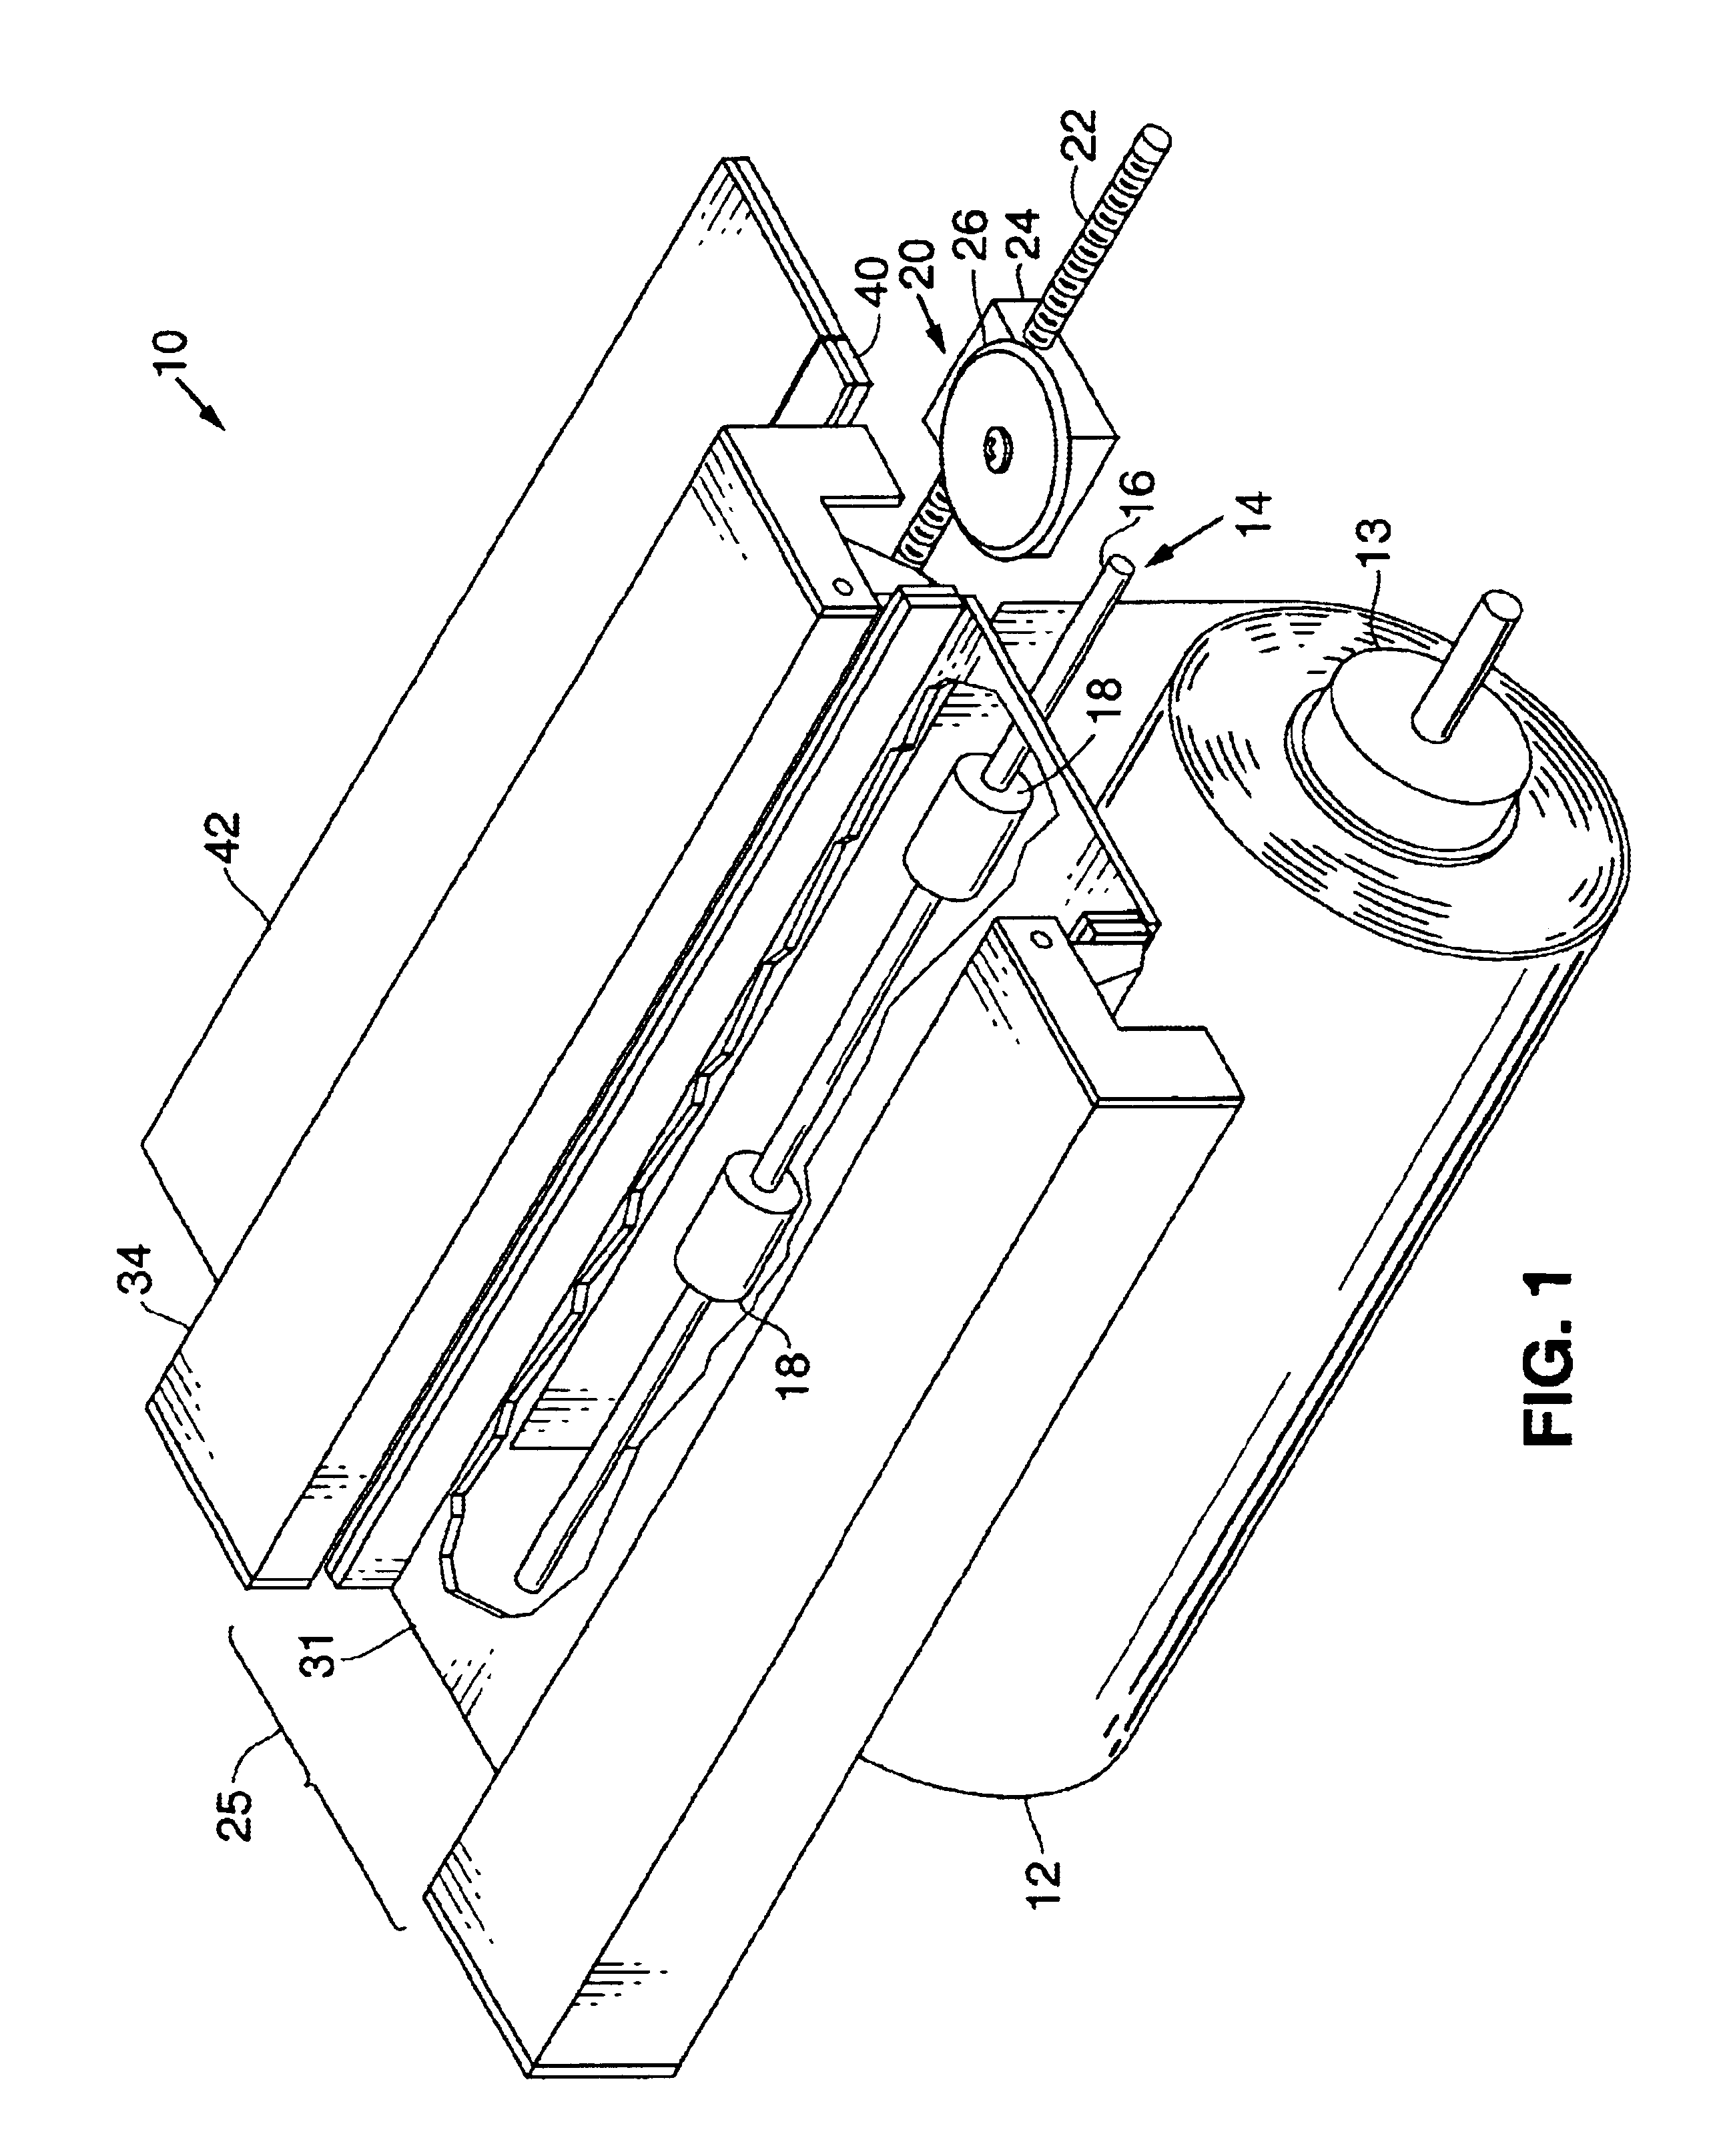 Method and apparatus for binding a plurality of sheets